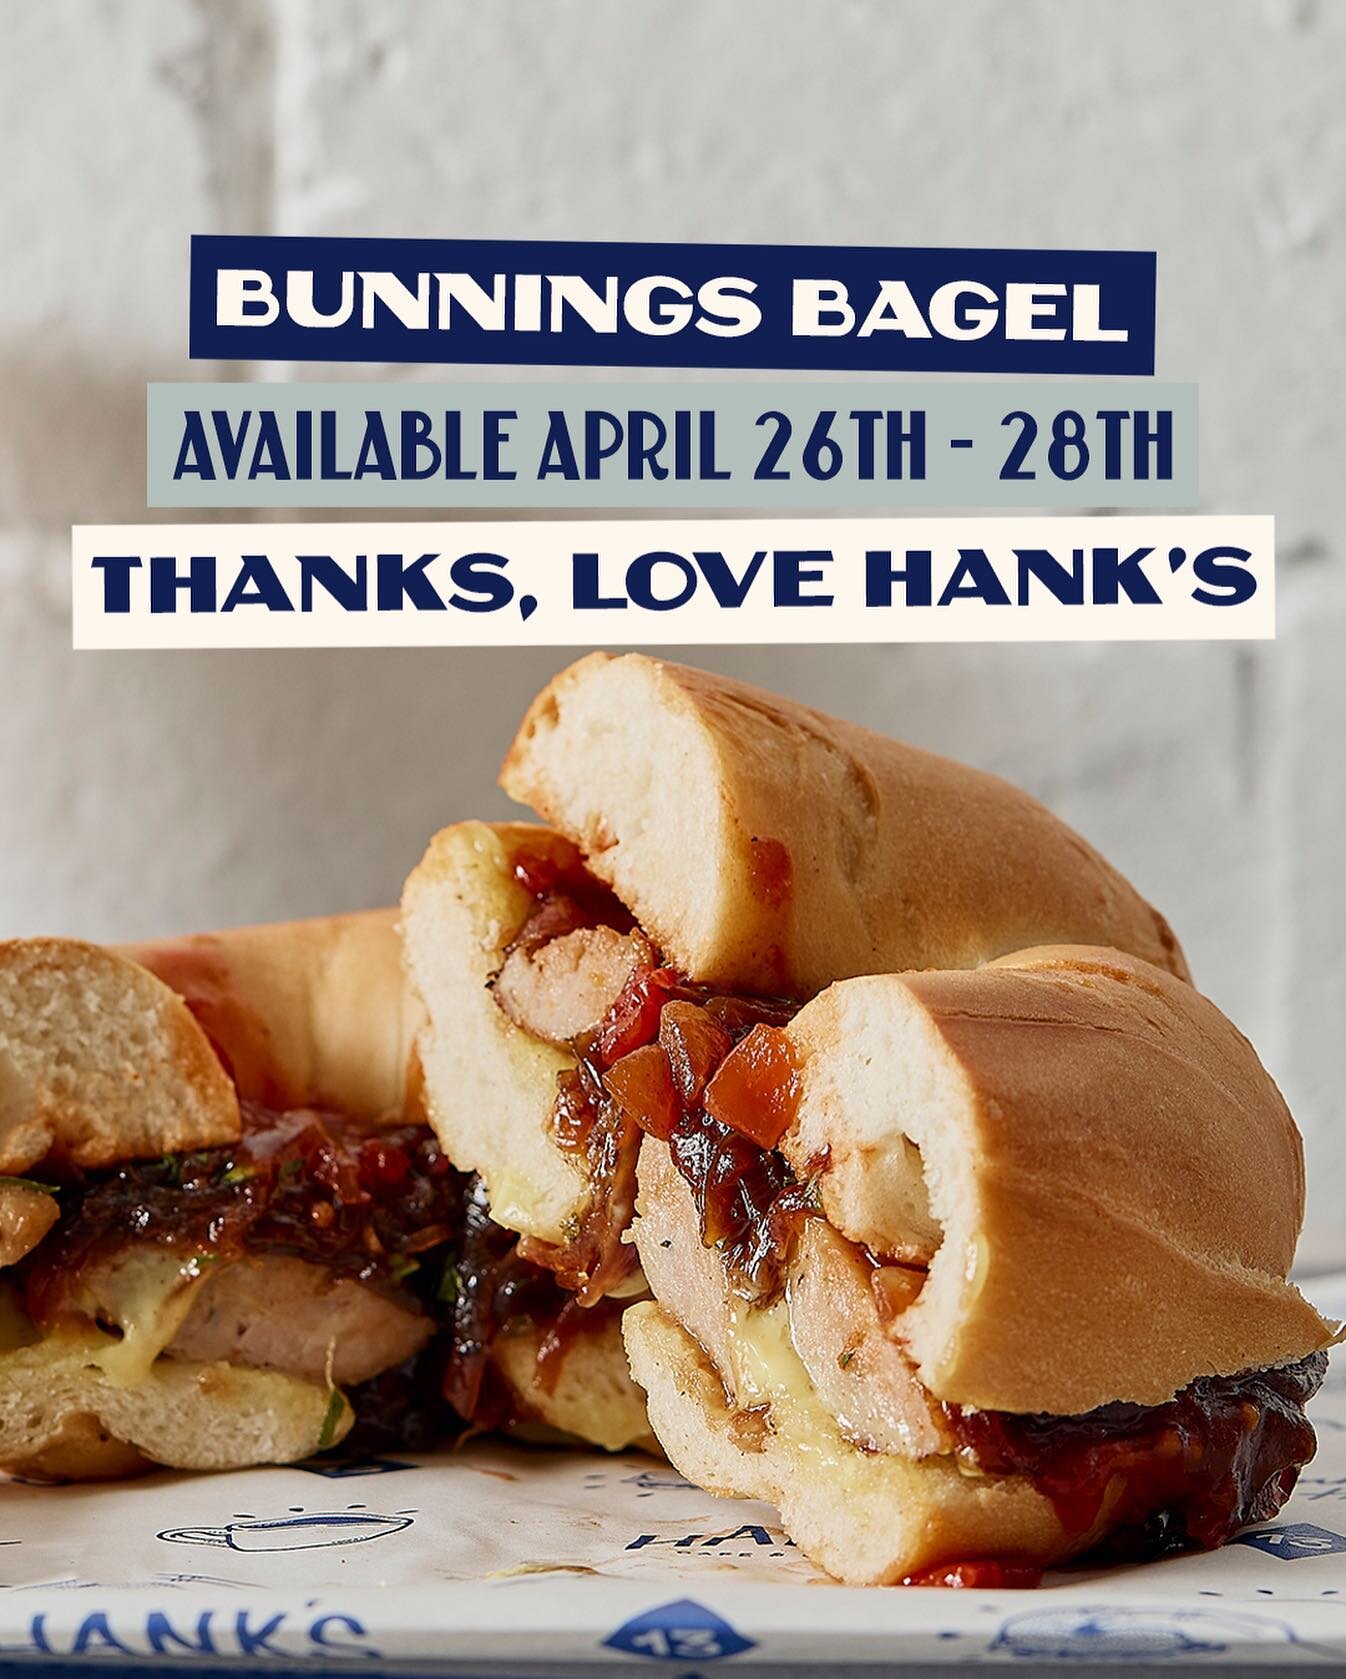 To celebrate our ~OFFICIAL~ launch tomorrow we&rsquo;re serving up our take on the iconic Bunnings sausage sanga.

Stuffed with a grilled pork and fennel sausage, caramelised onion, tomato relish and sandwiched between a Savion bagel of your choice.
